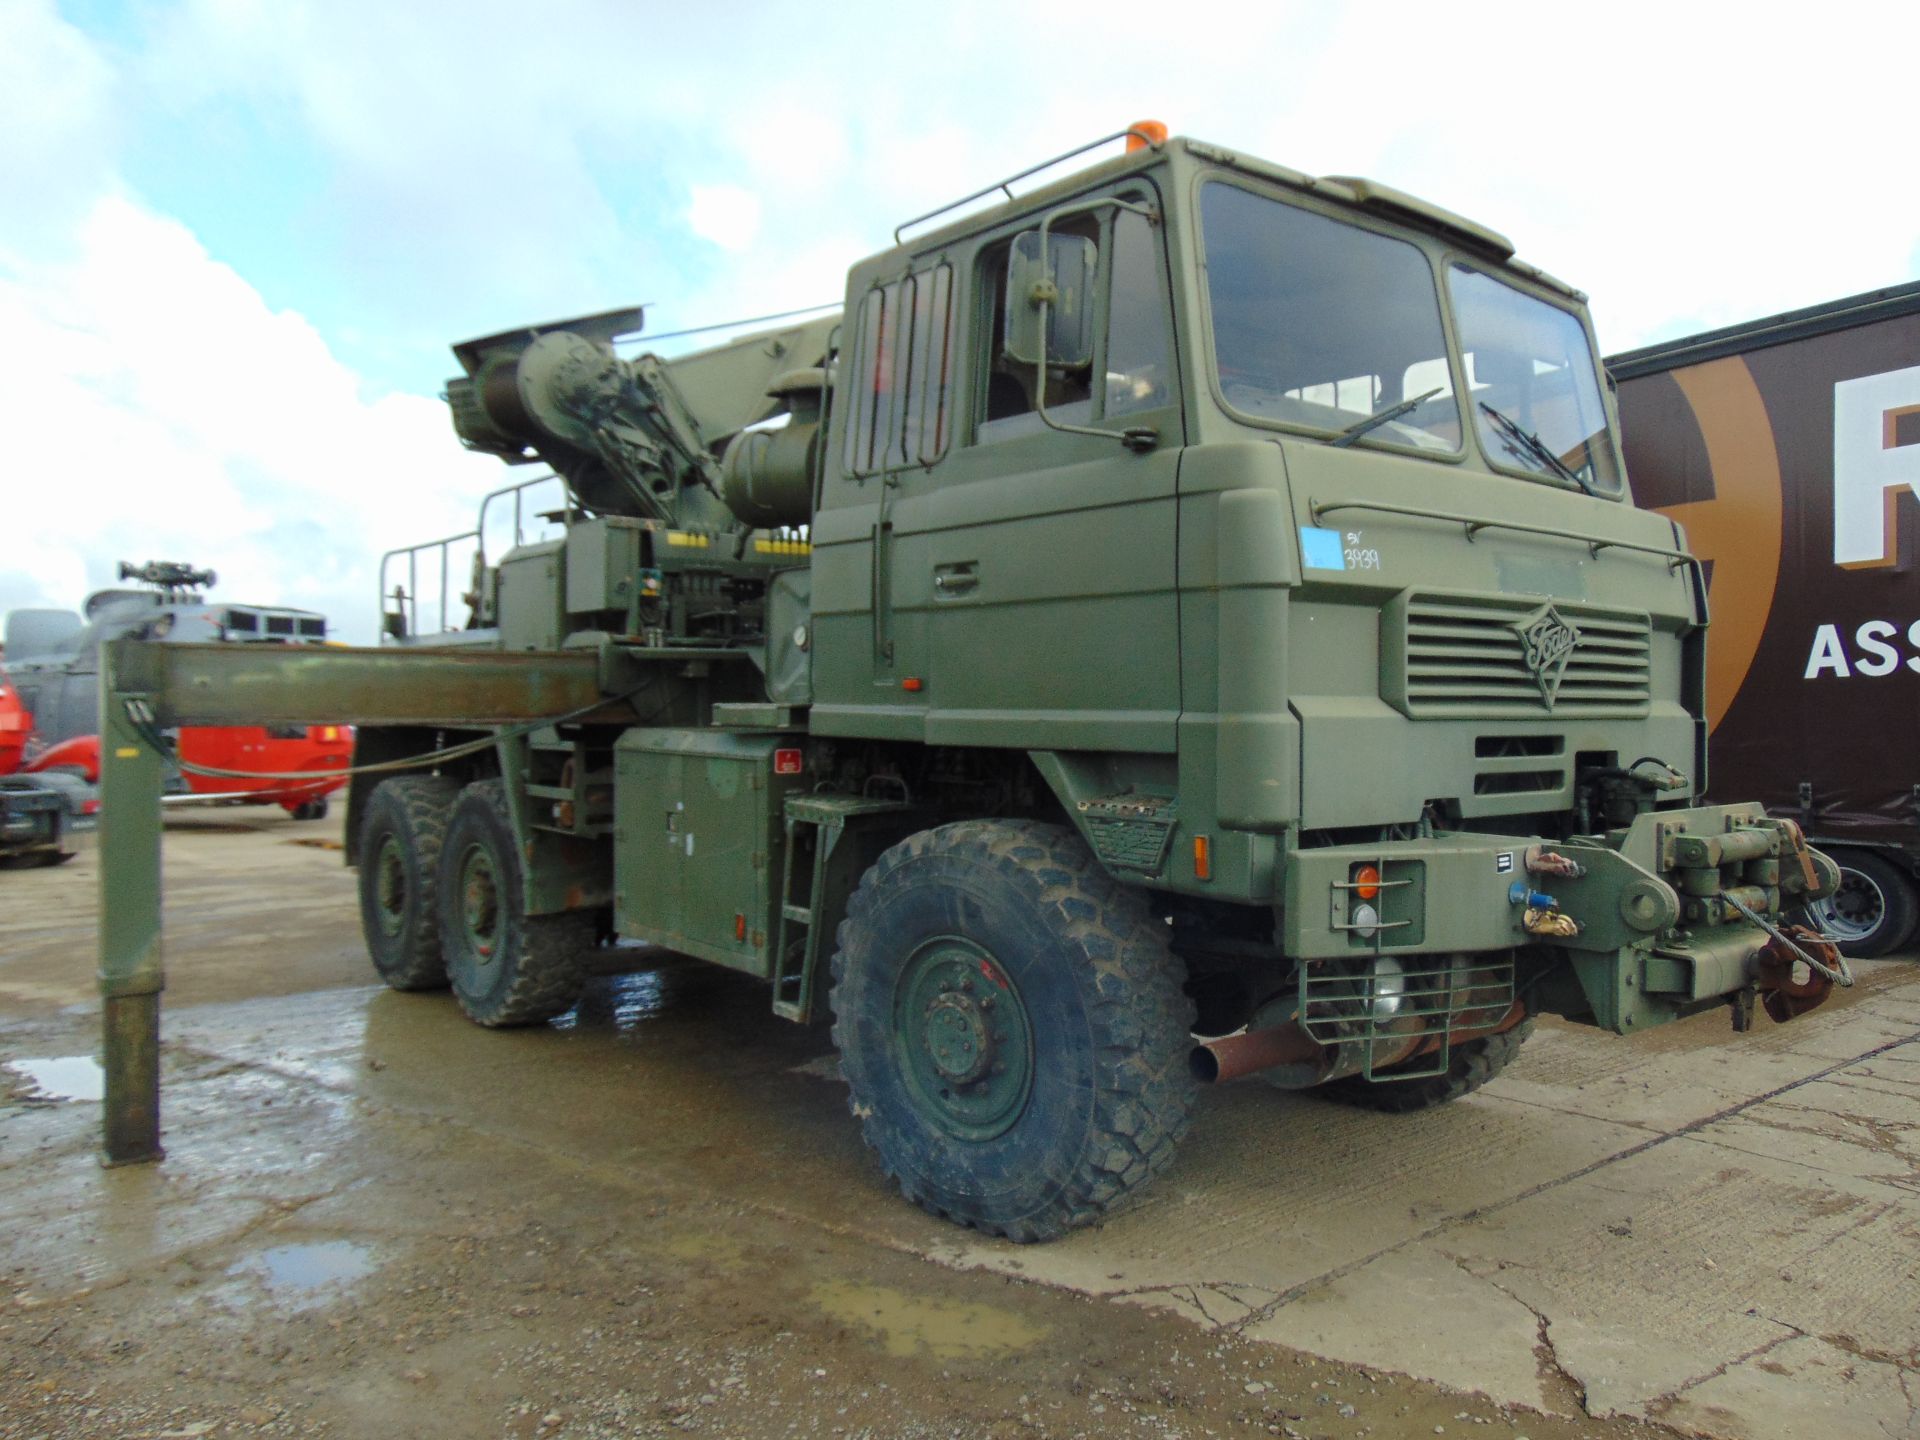 Foden 6x6 Recovery Vehicle which is Complete with Remotes and EKA Recovery Tools - Image 3 of 31